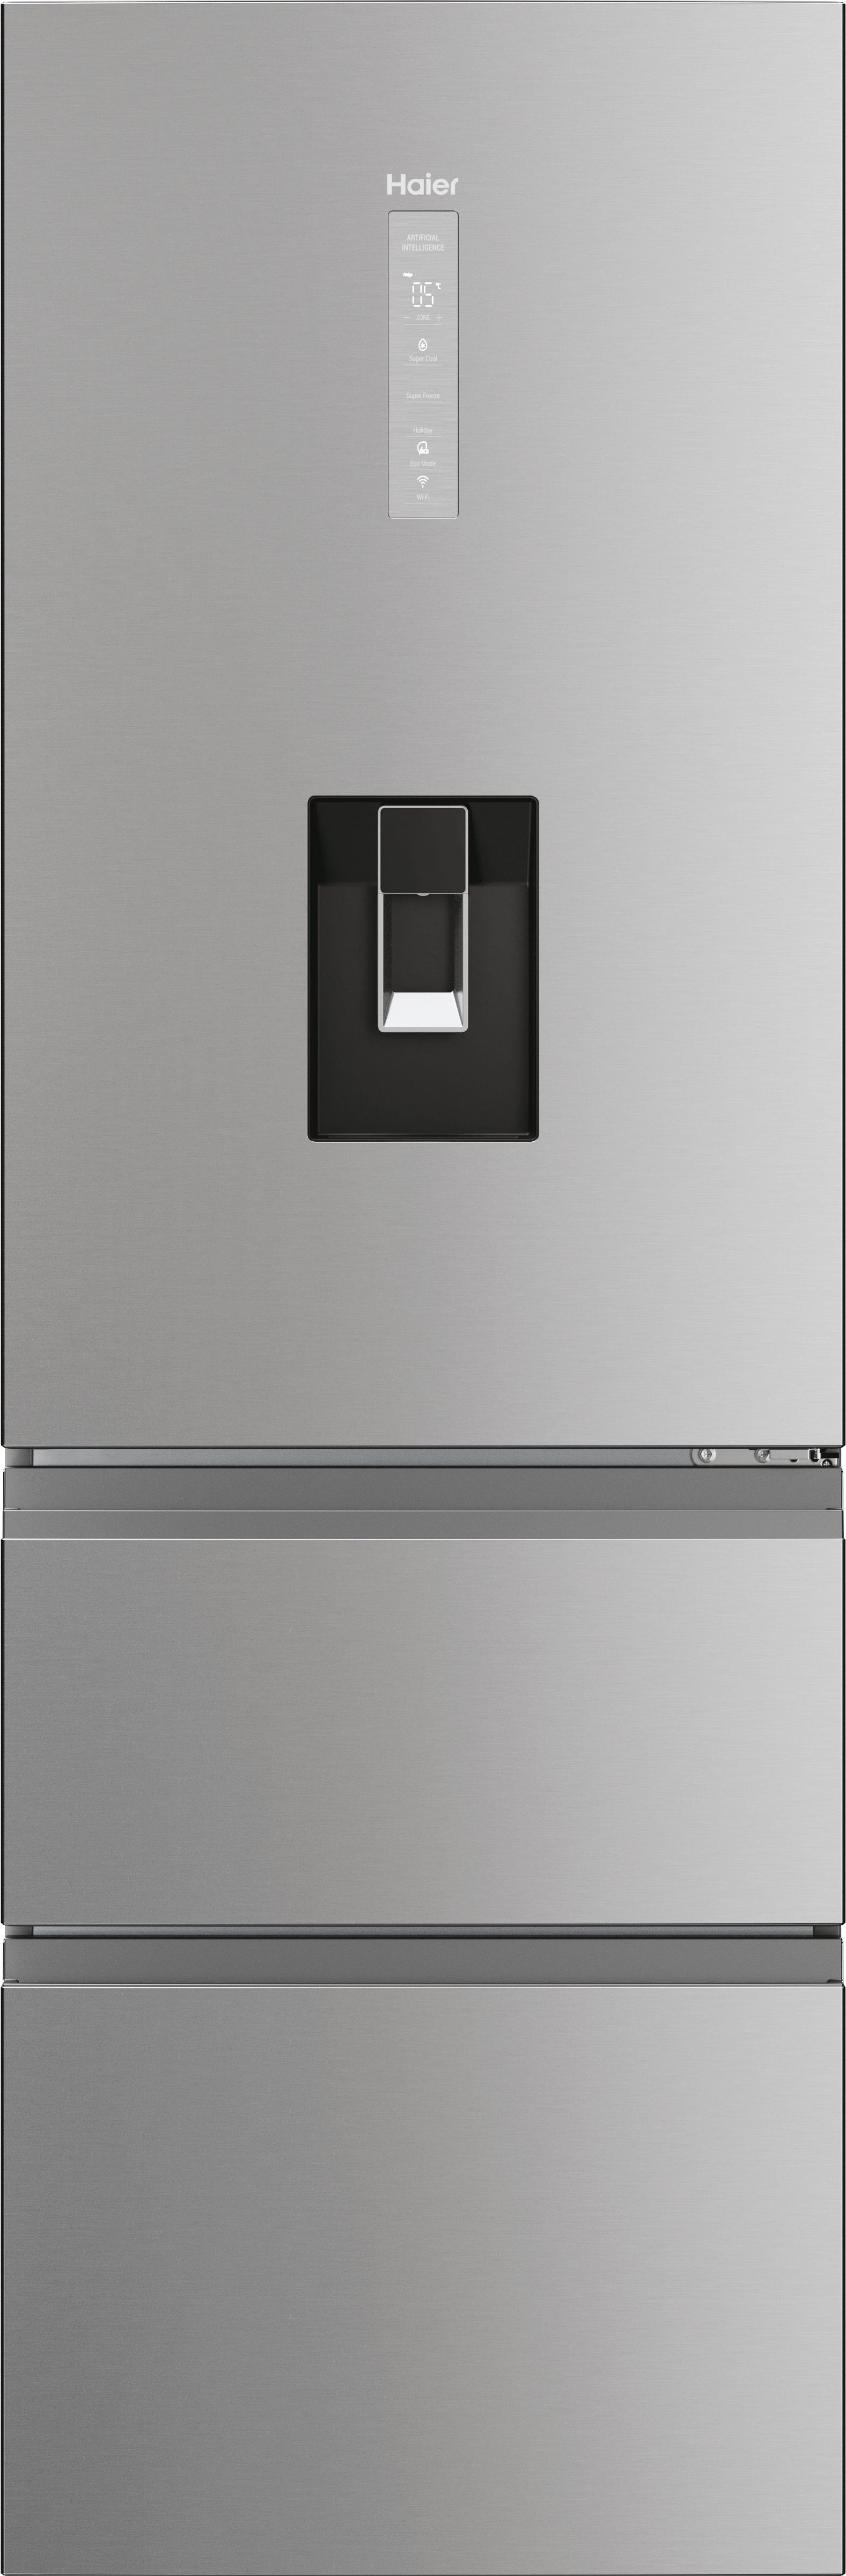 Haier 3D 60 Series 5 HTW5618DWMG Wifi Connected 60/40 No Frost Fridge Freezer - Silver - D Rated, Silver